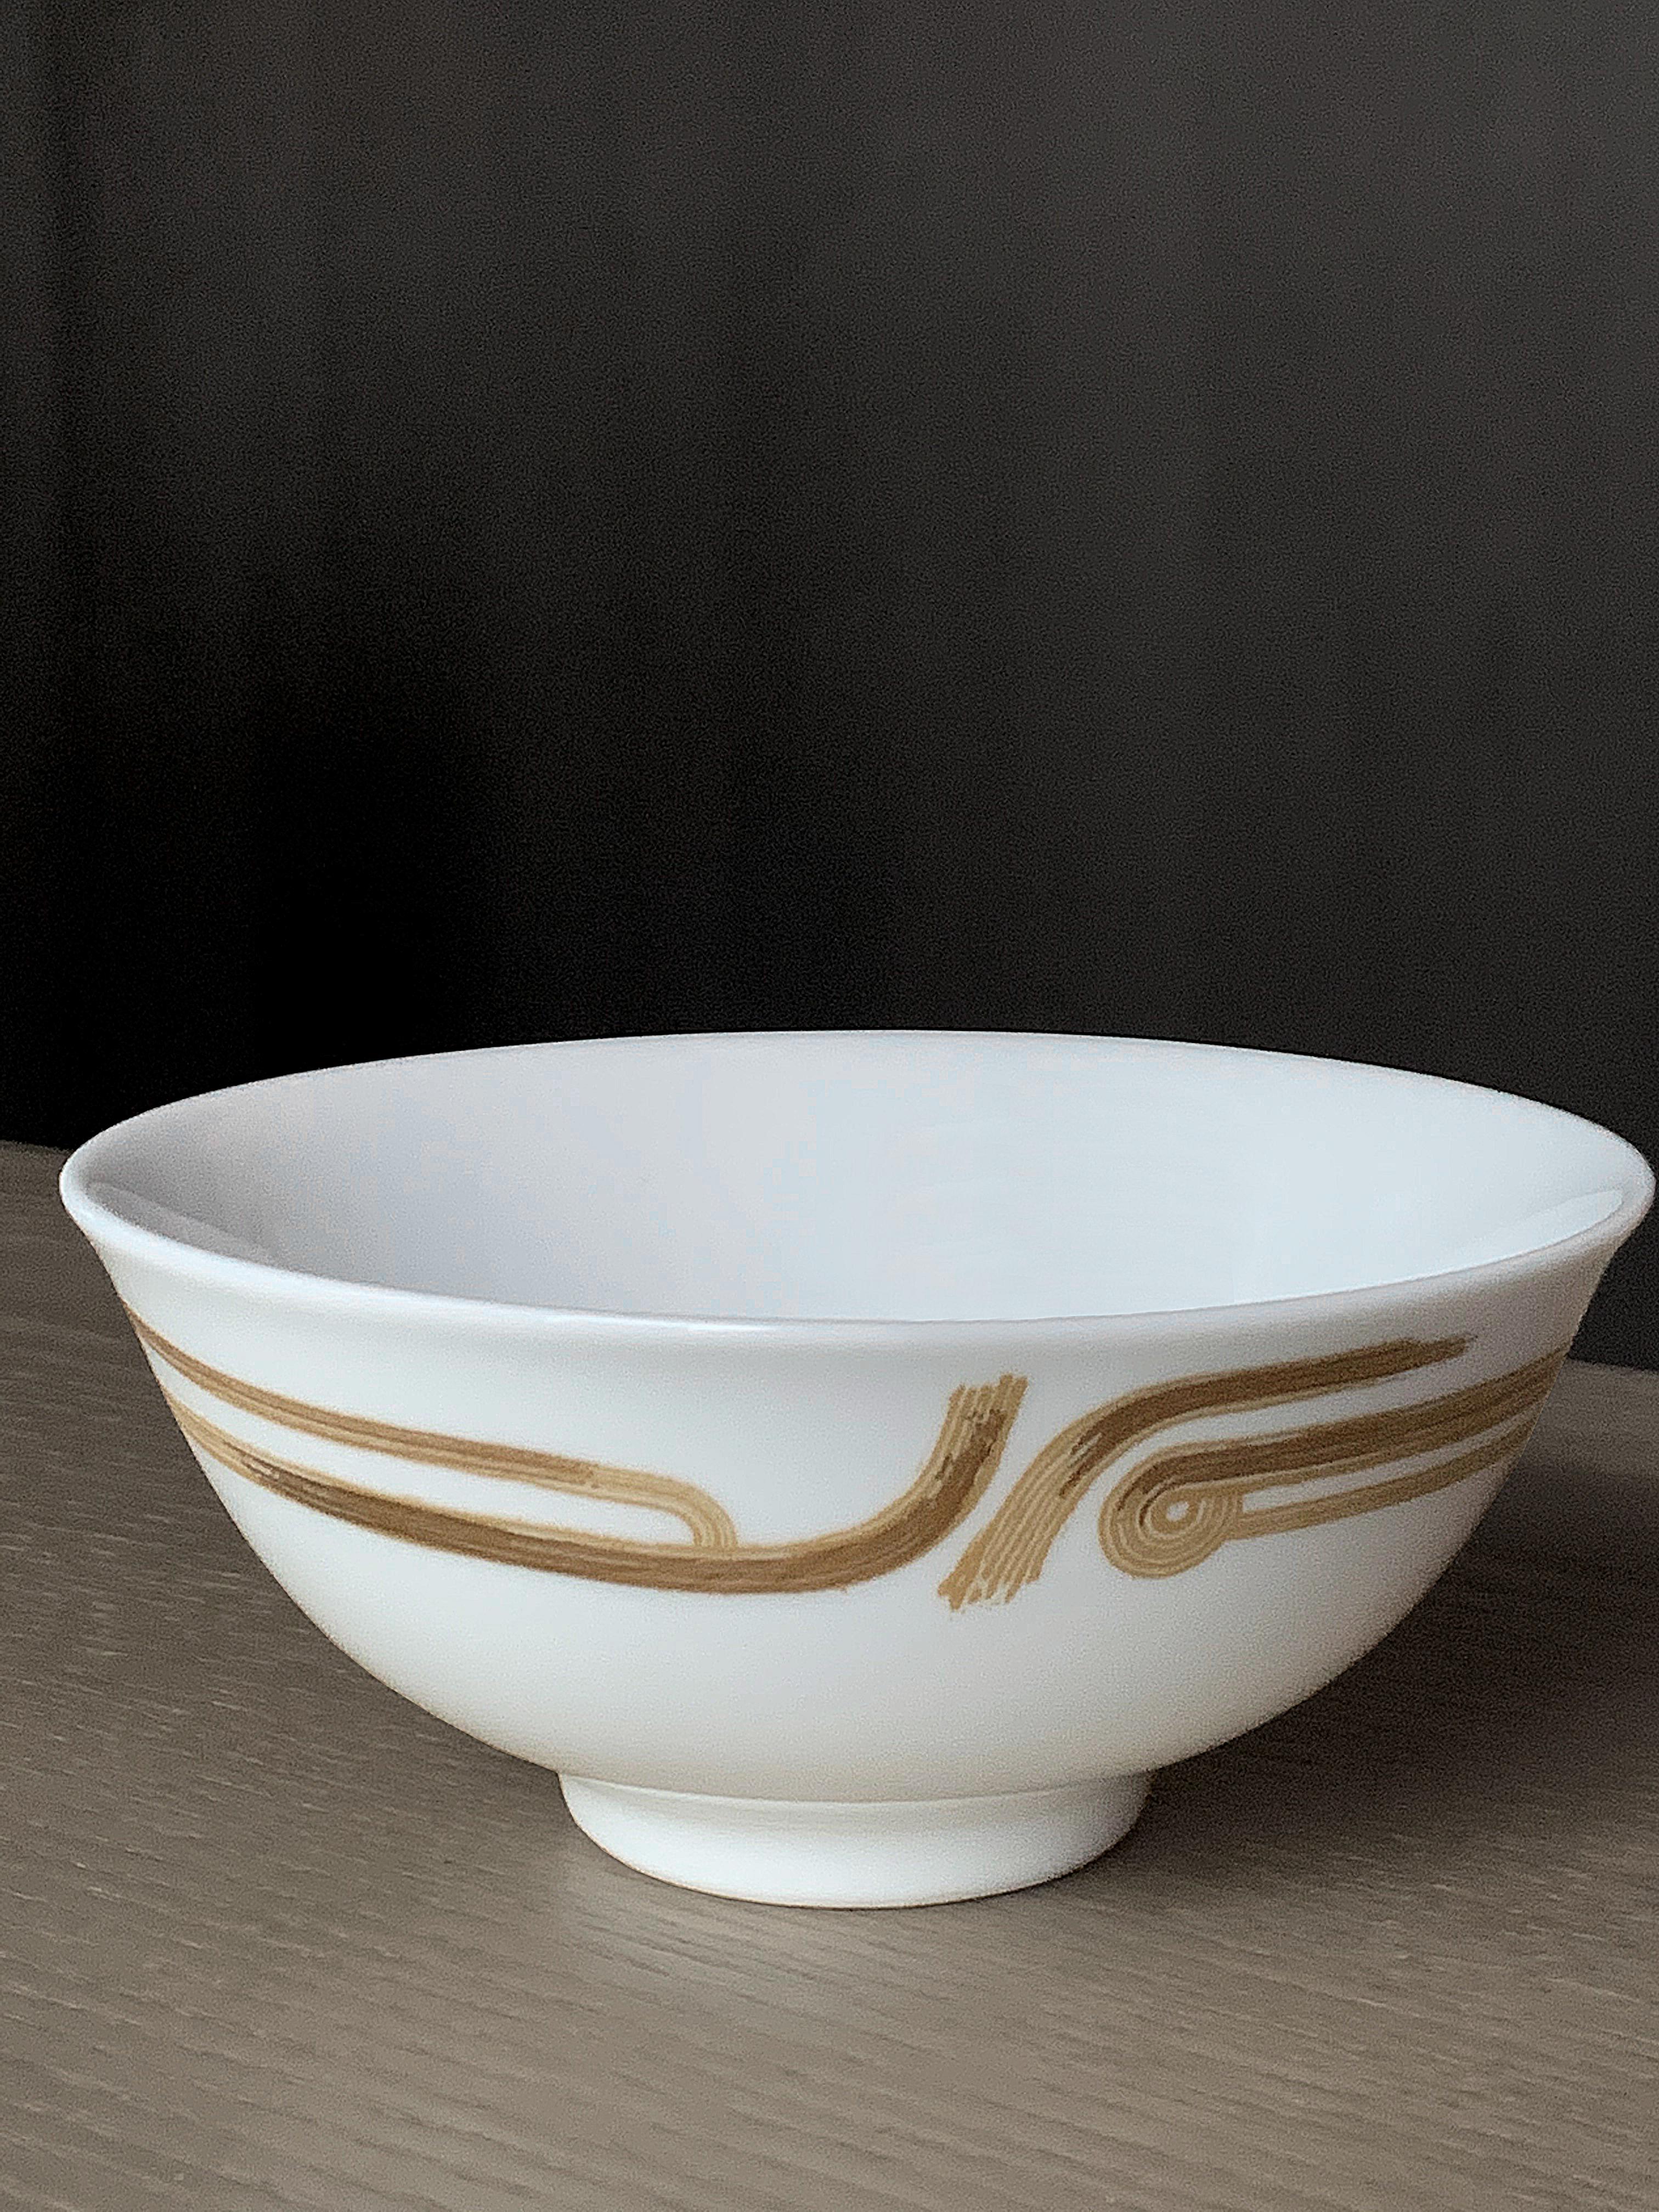 Contemporary Set of 2 Chinese Rice Bowl Art Déco Garden André Fu Living Tableware New For Sale